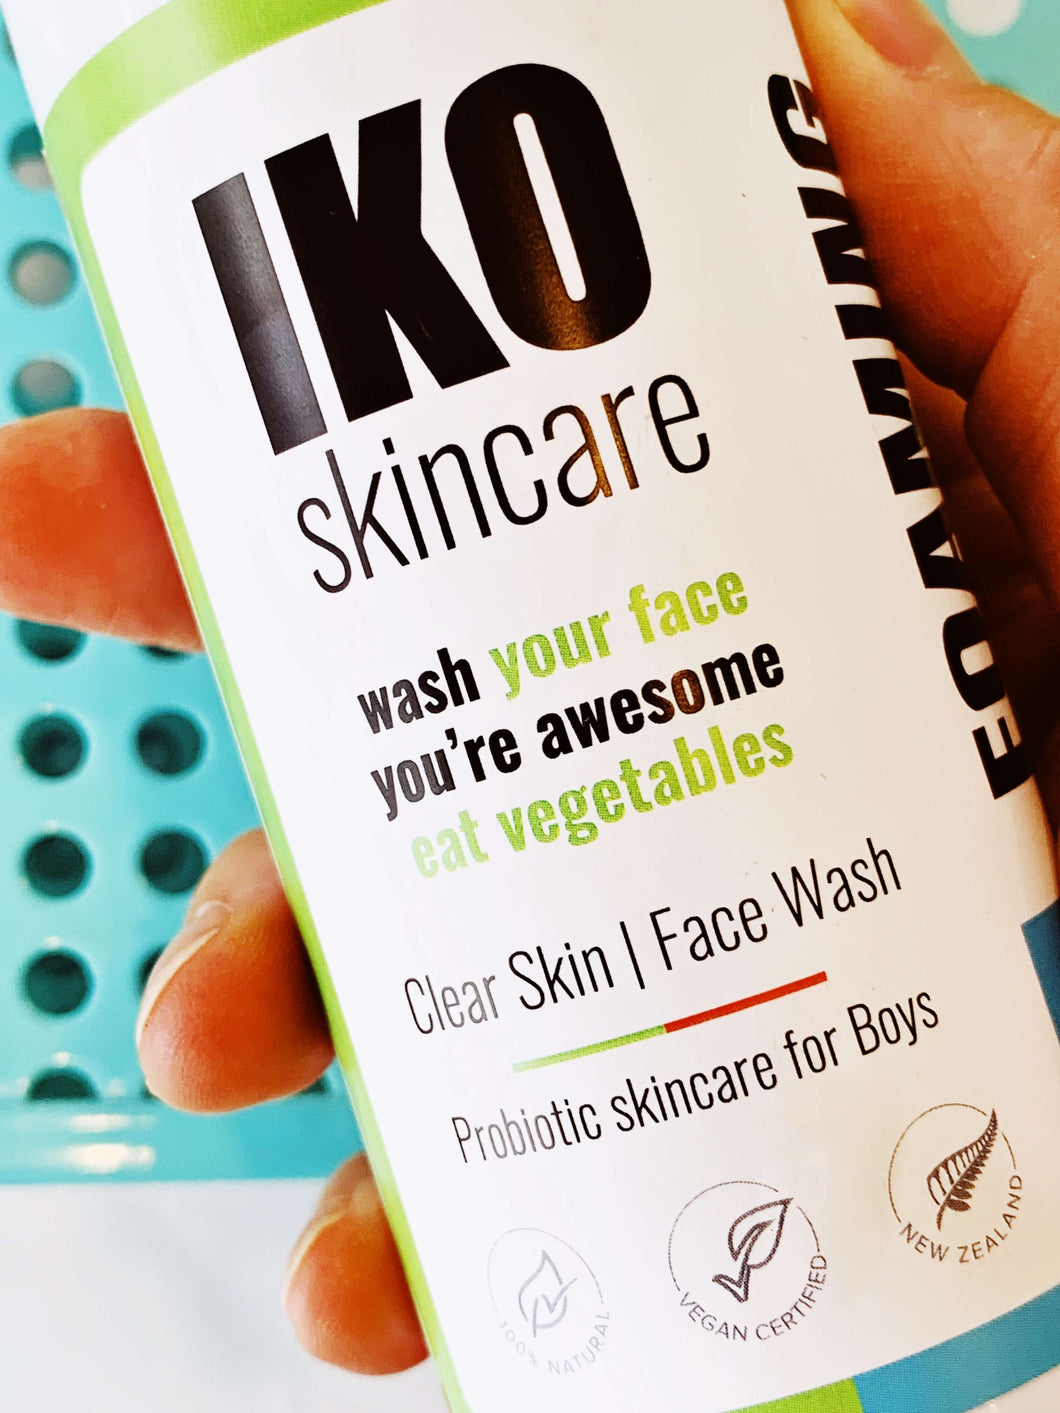 IKO wash your face foaming Face wash. Organic and natural vegan probiotic for tween and teen boys